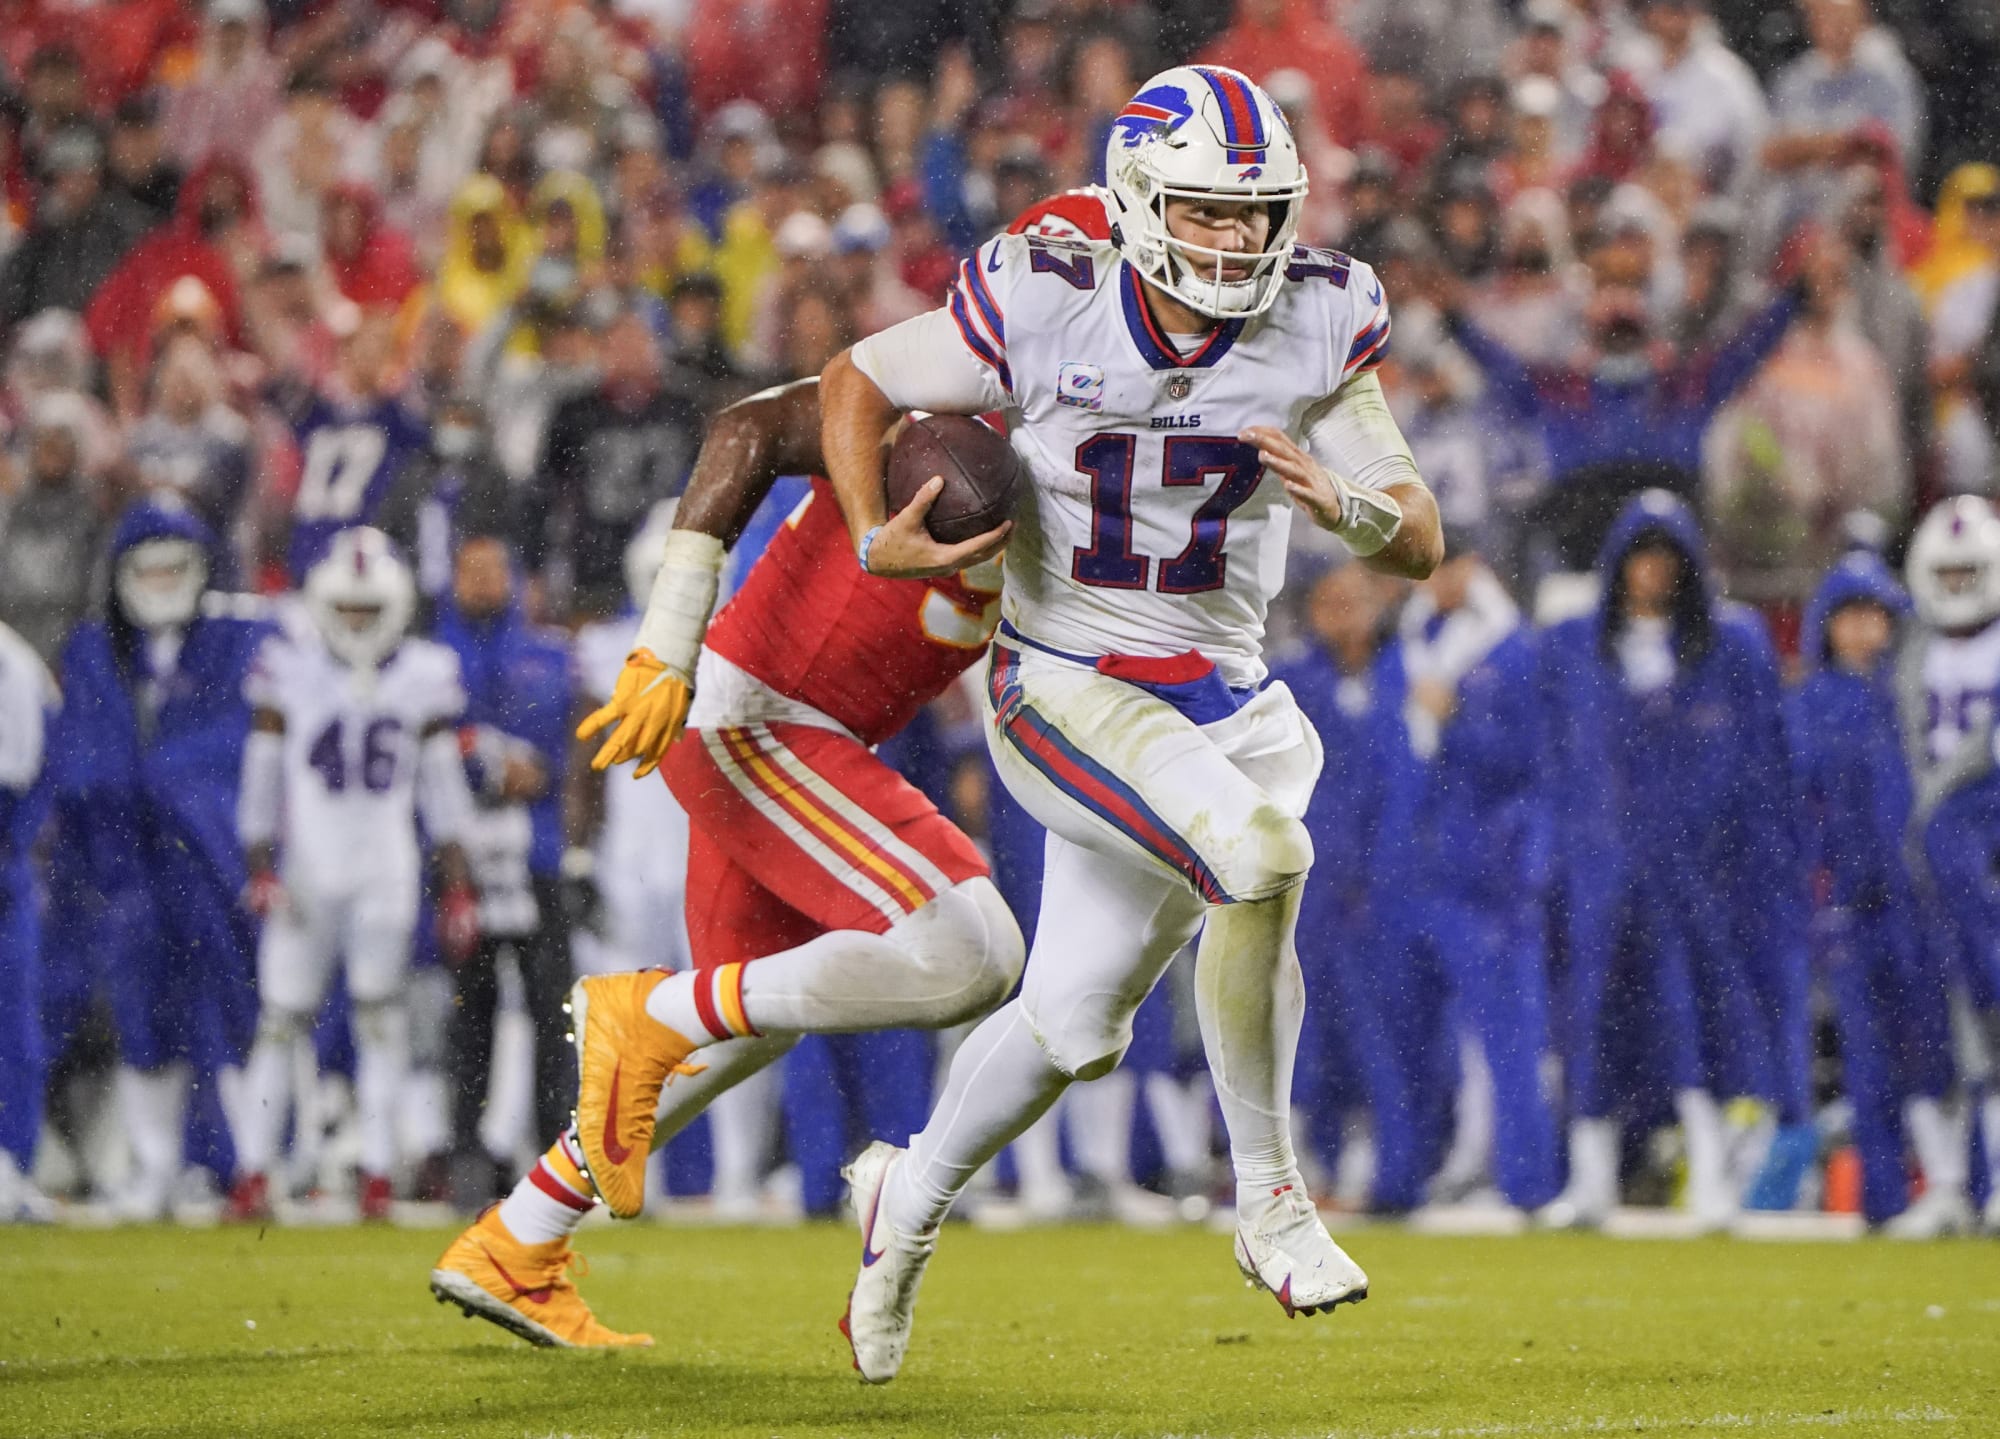 Buffalo Bills vs. Kansas City Chiefs: Top storylines in Divisional Round